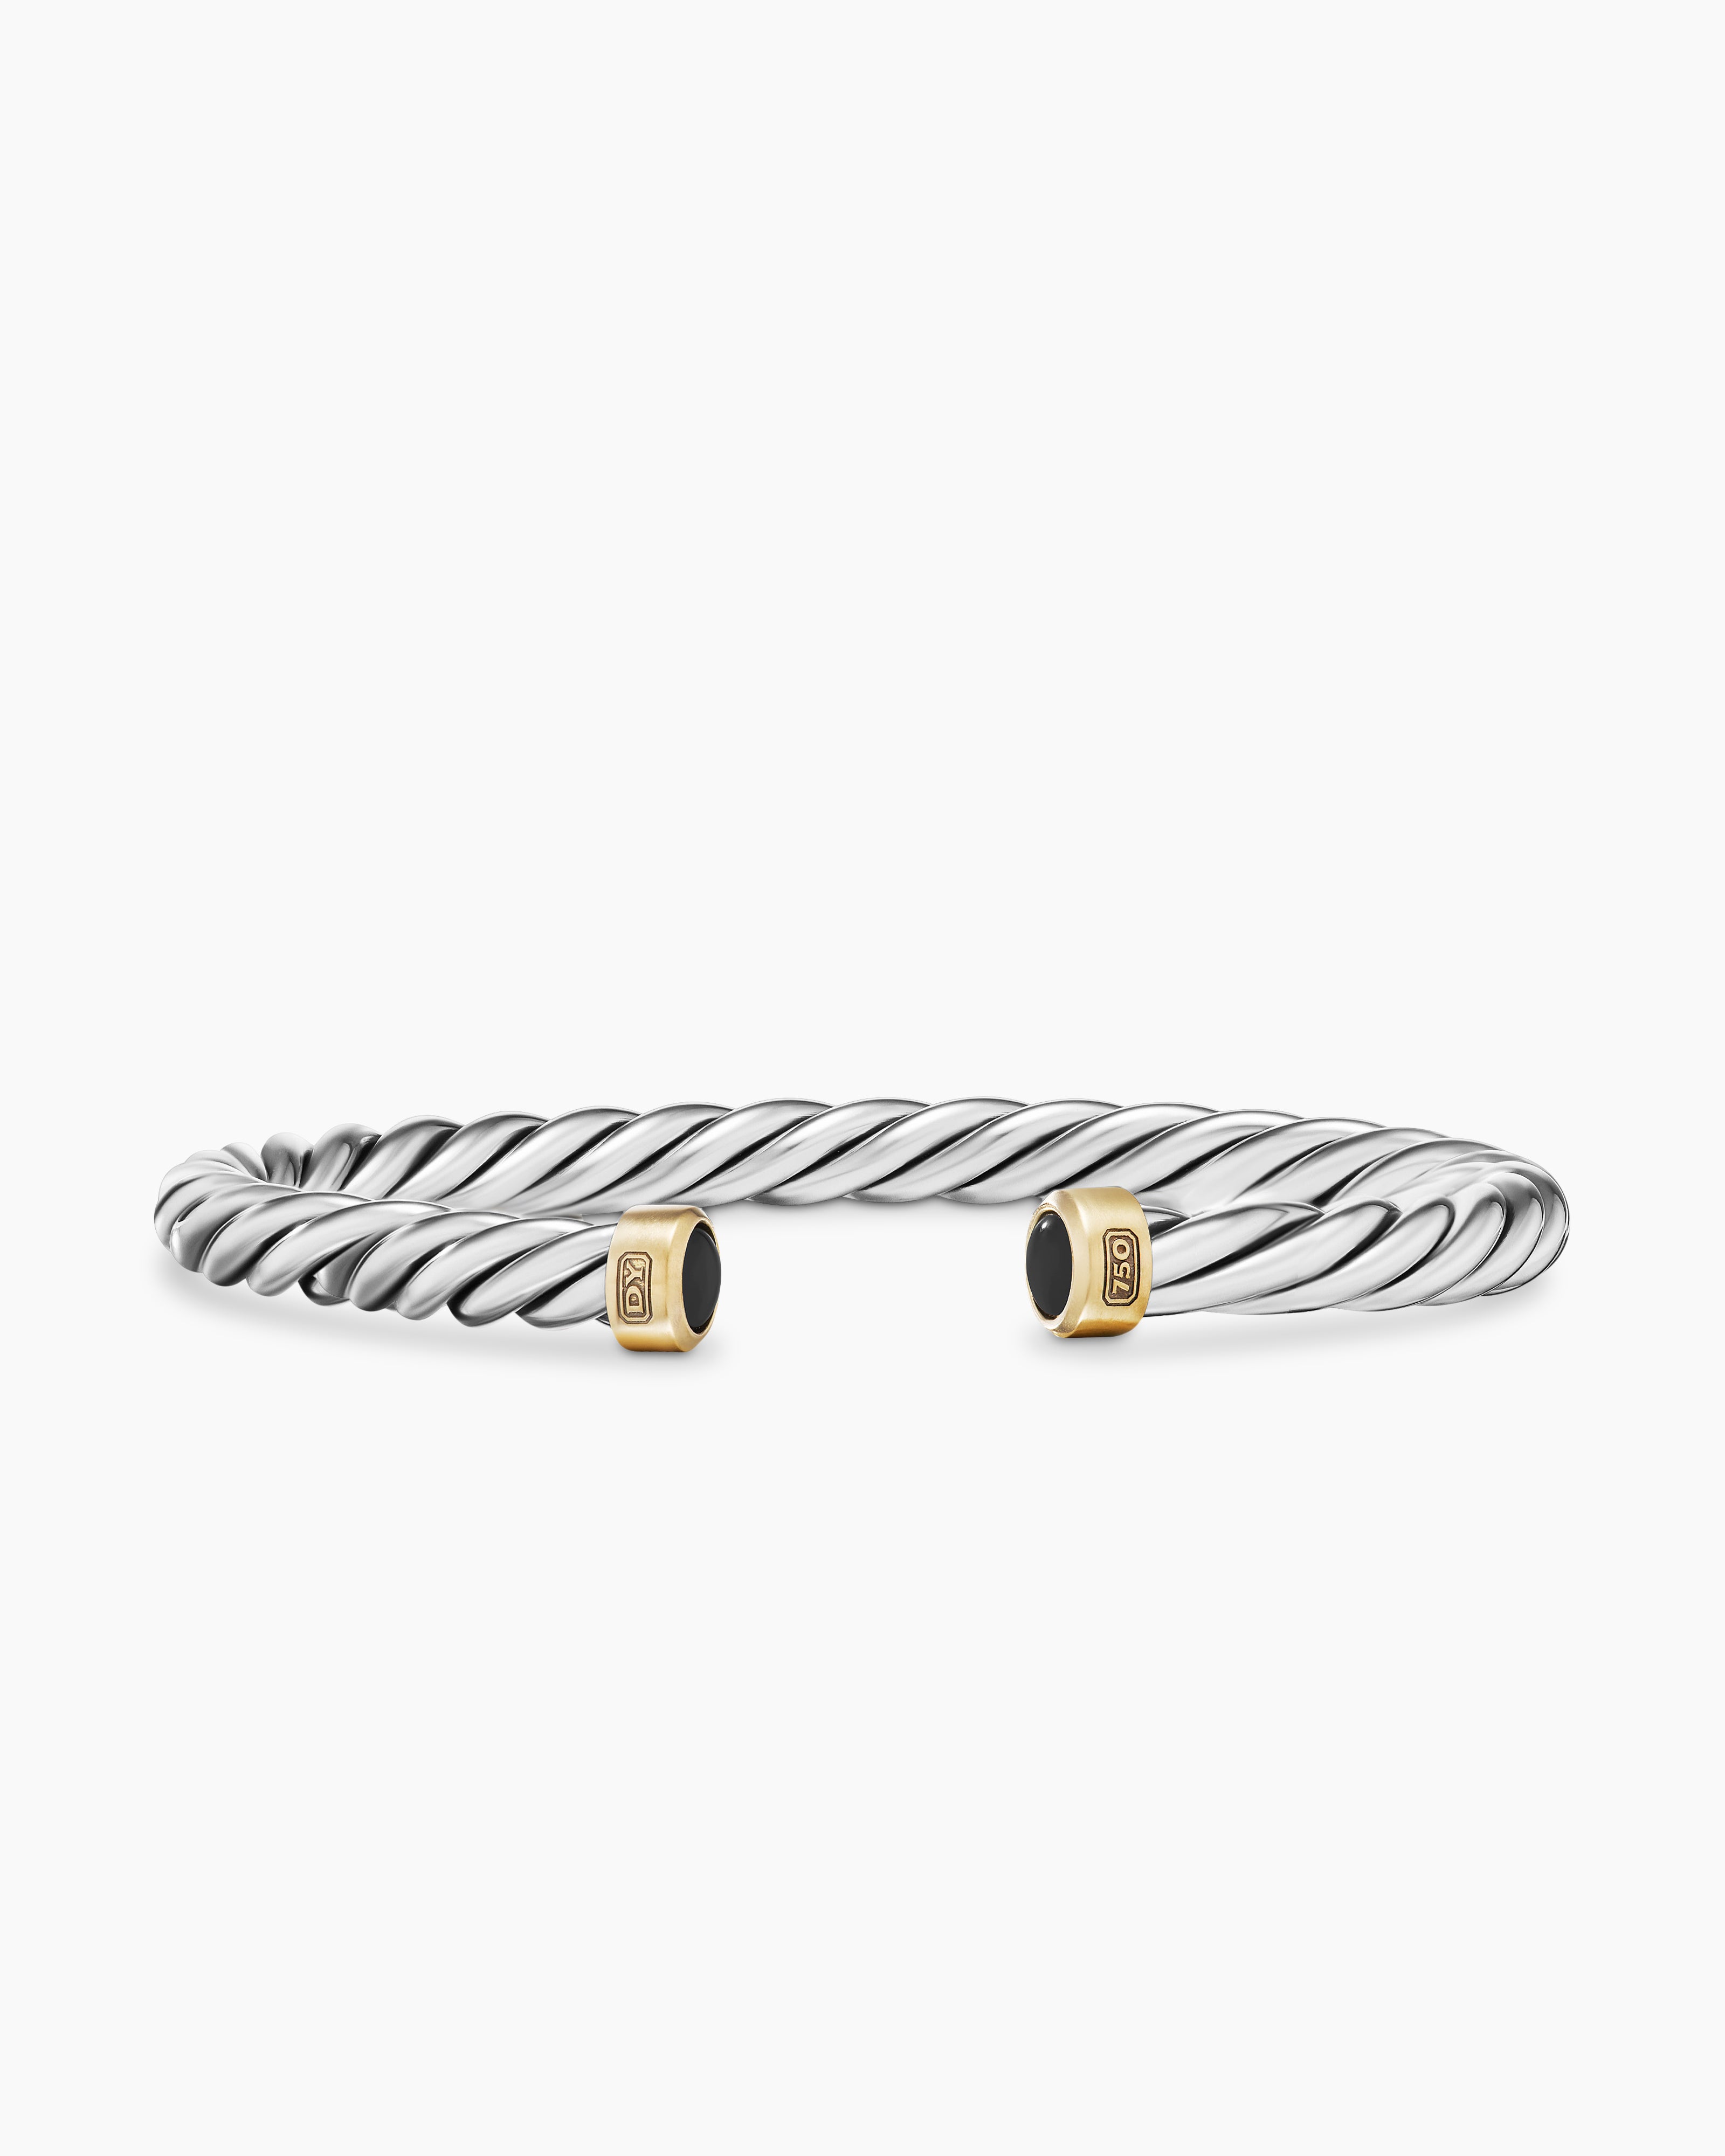 ALL METAL 8 Wire Bracelet - with Options